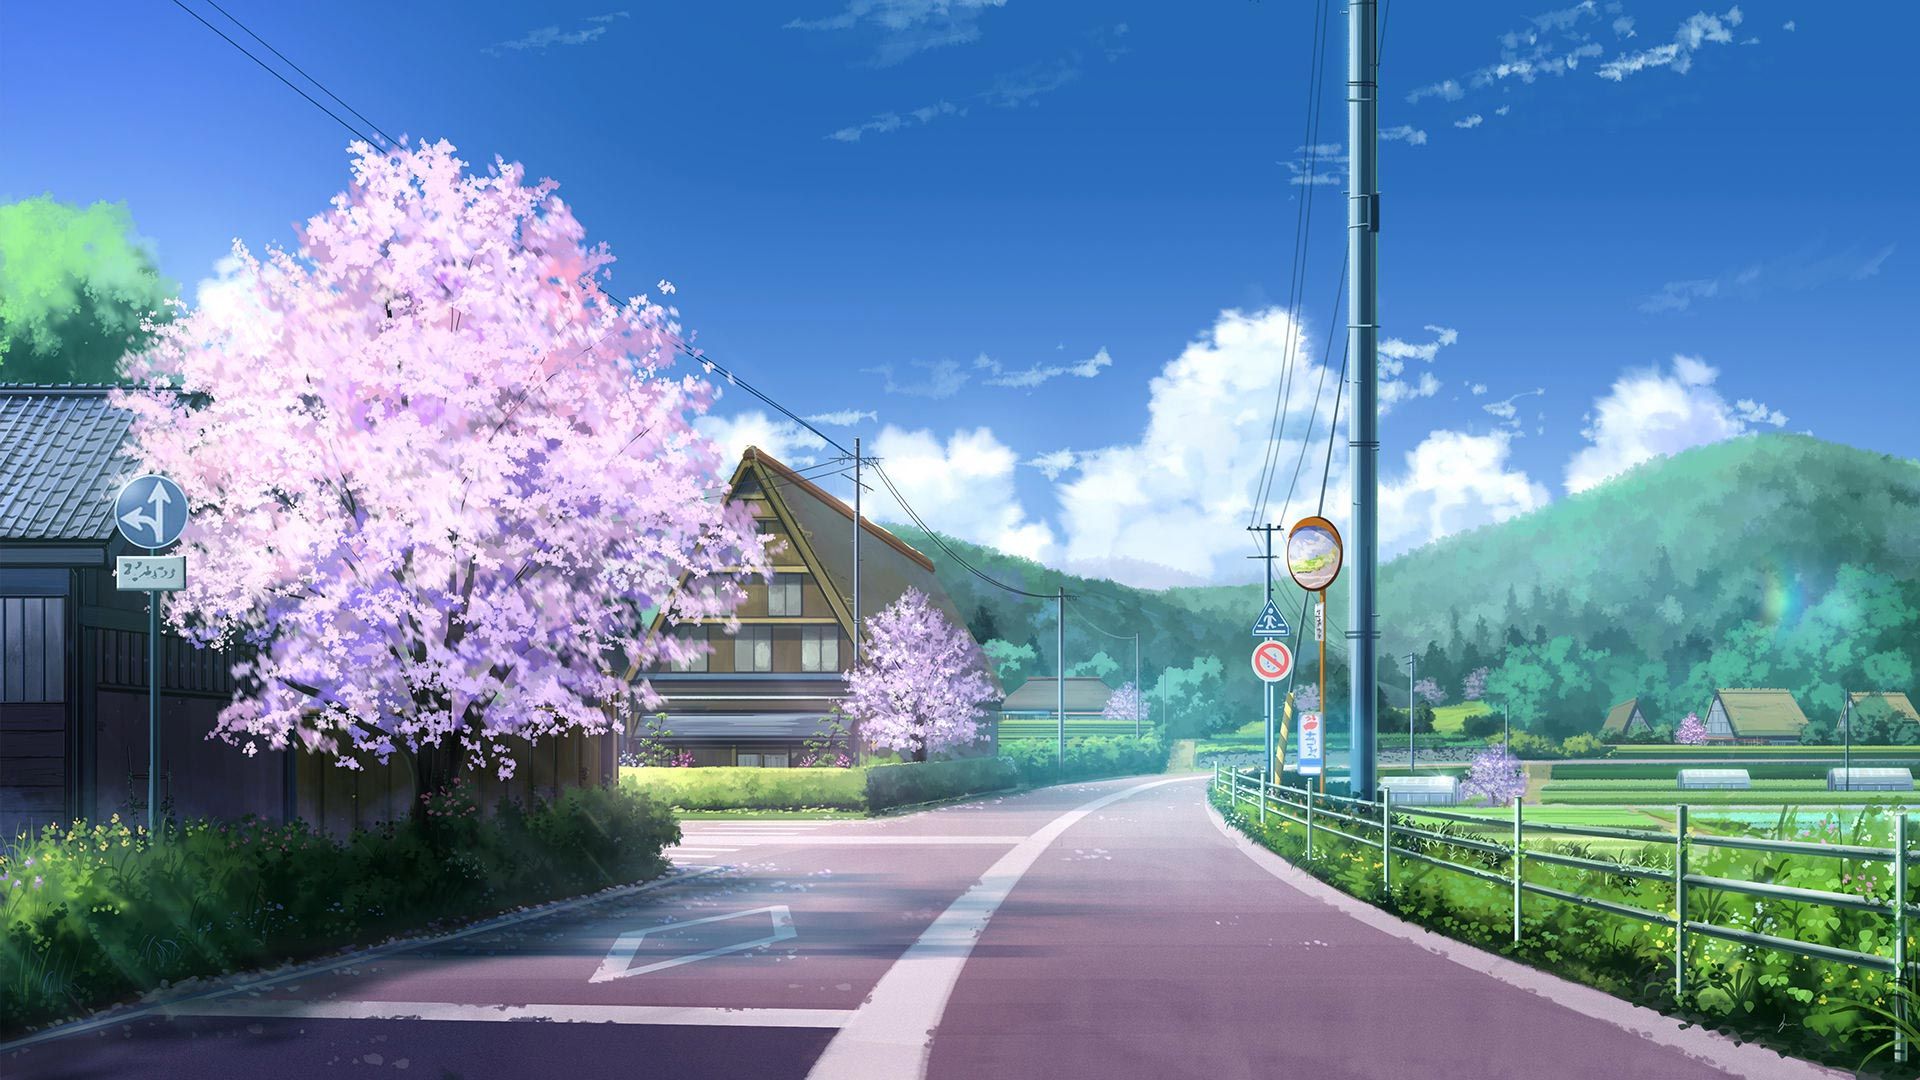 Windows Anime Wallpaper HD Landscapes Theme For